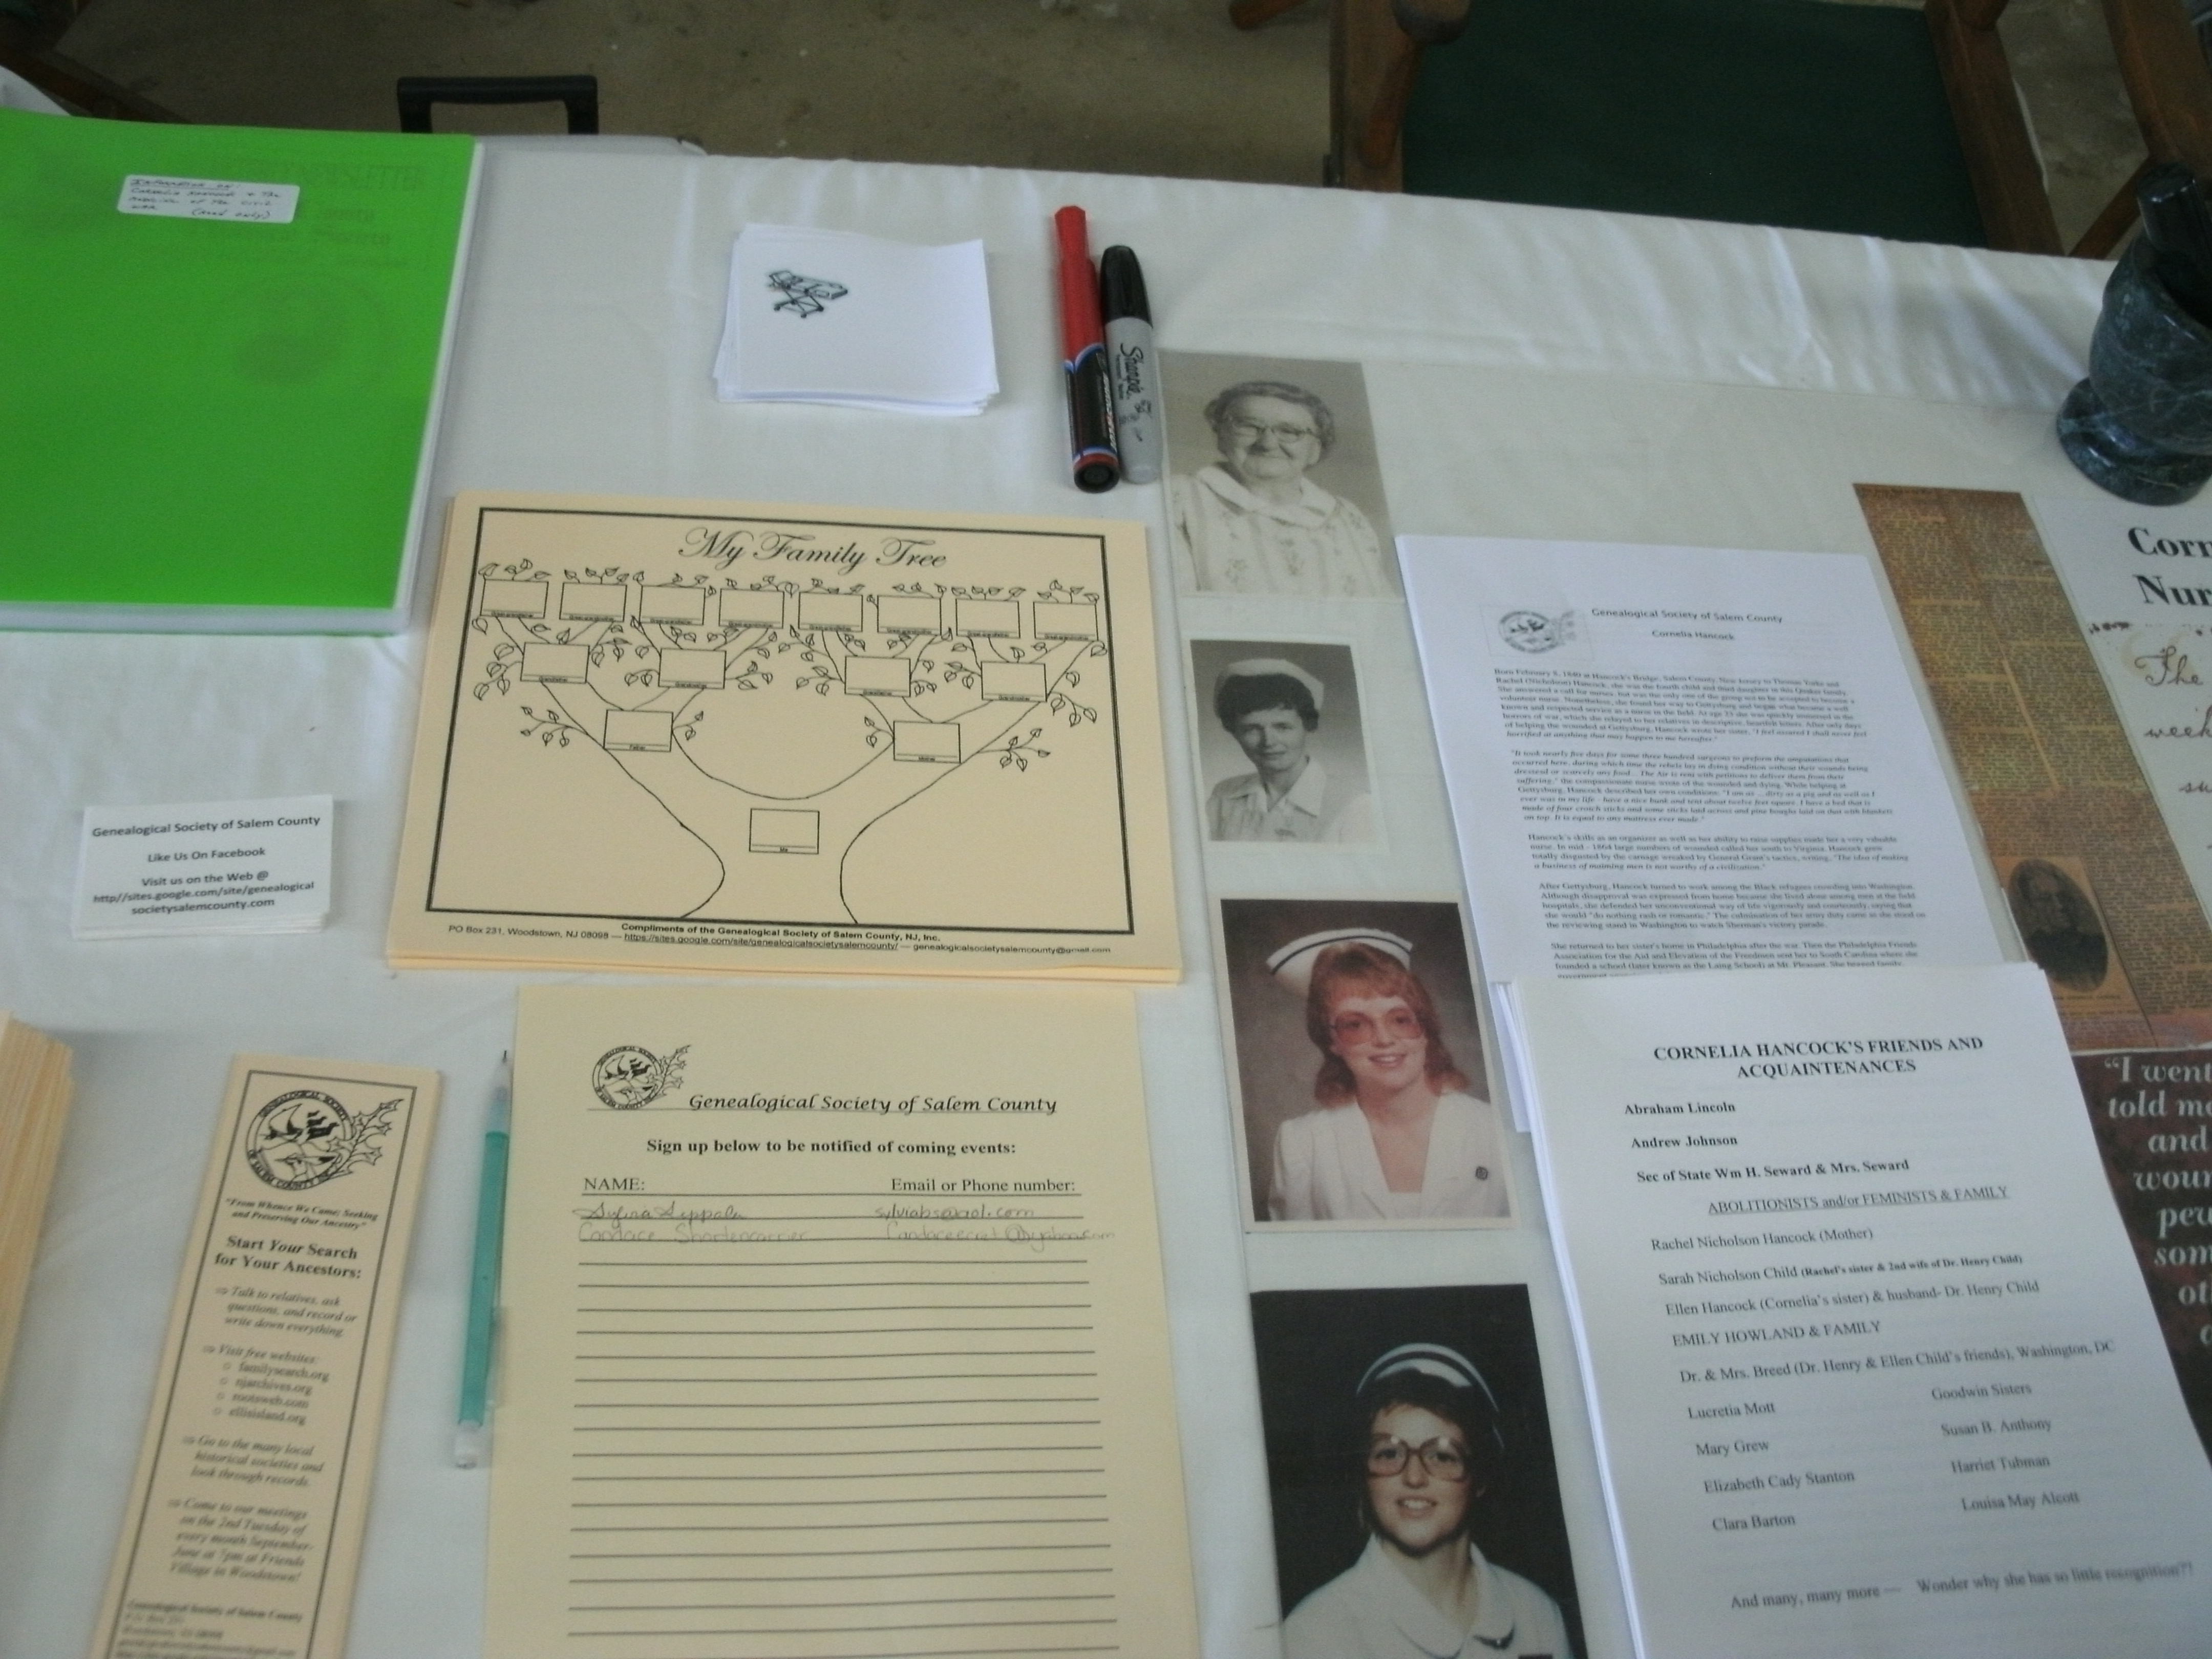 Also on display were photographs of other local nurses and midwives from our members' family trees.